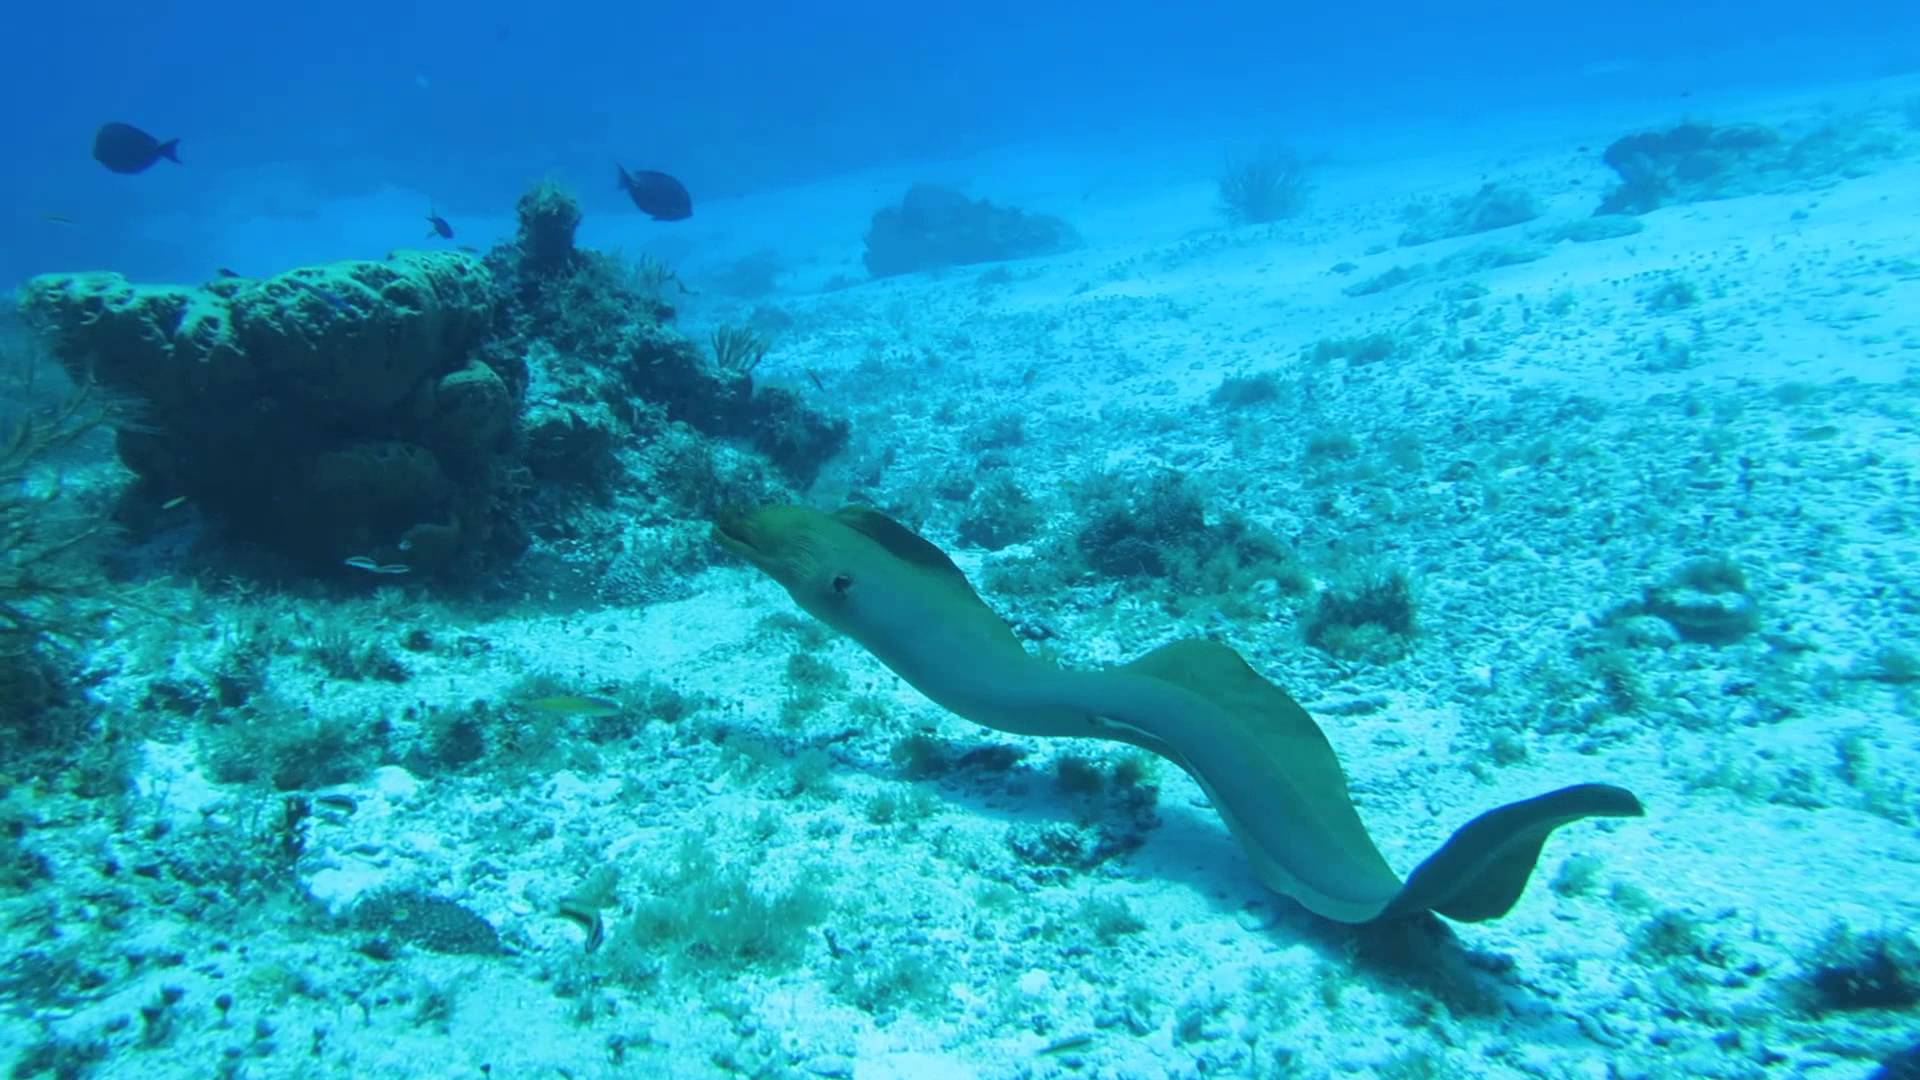 New Species Of Moray Eel Discovered In India